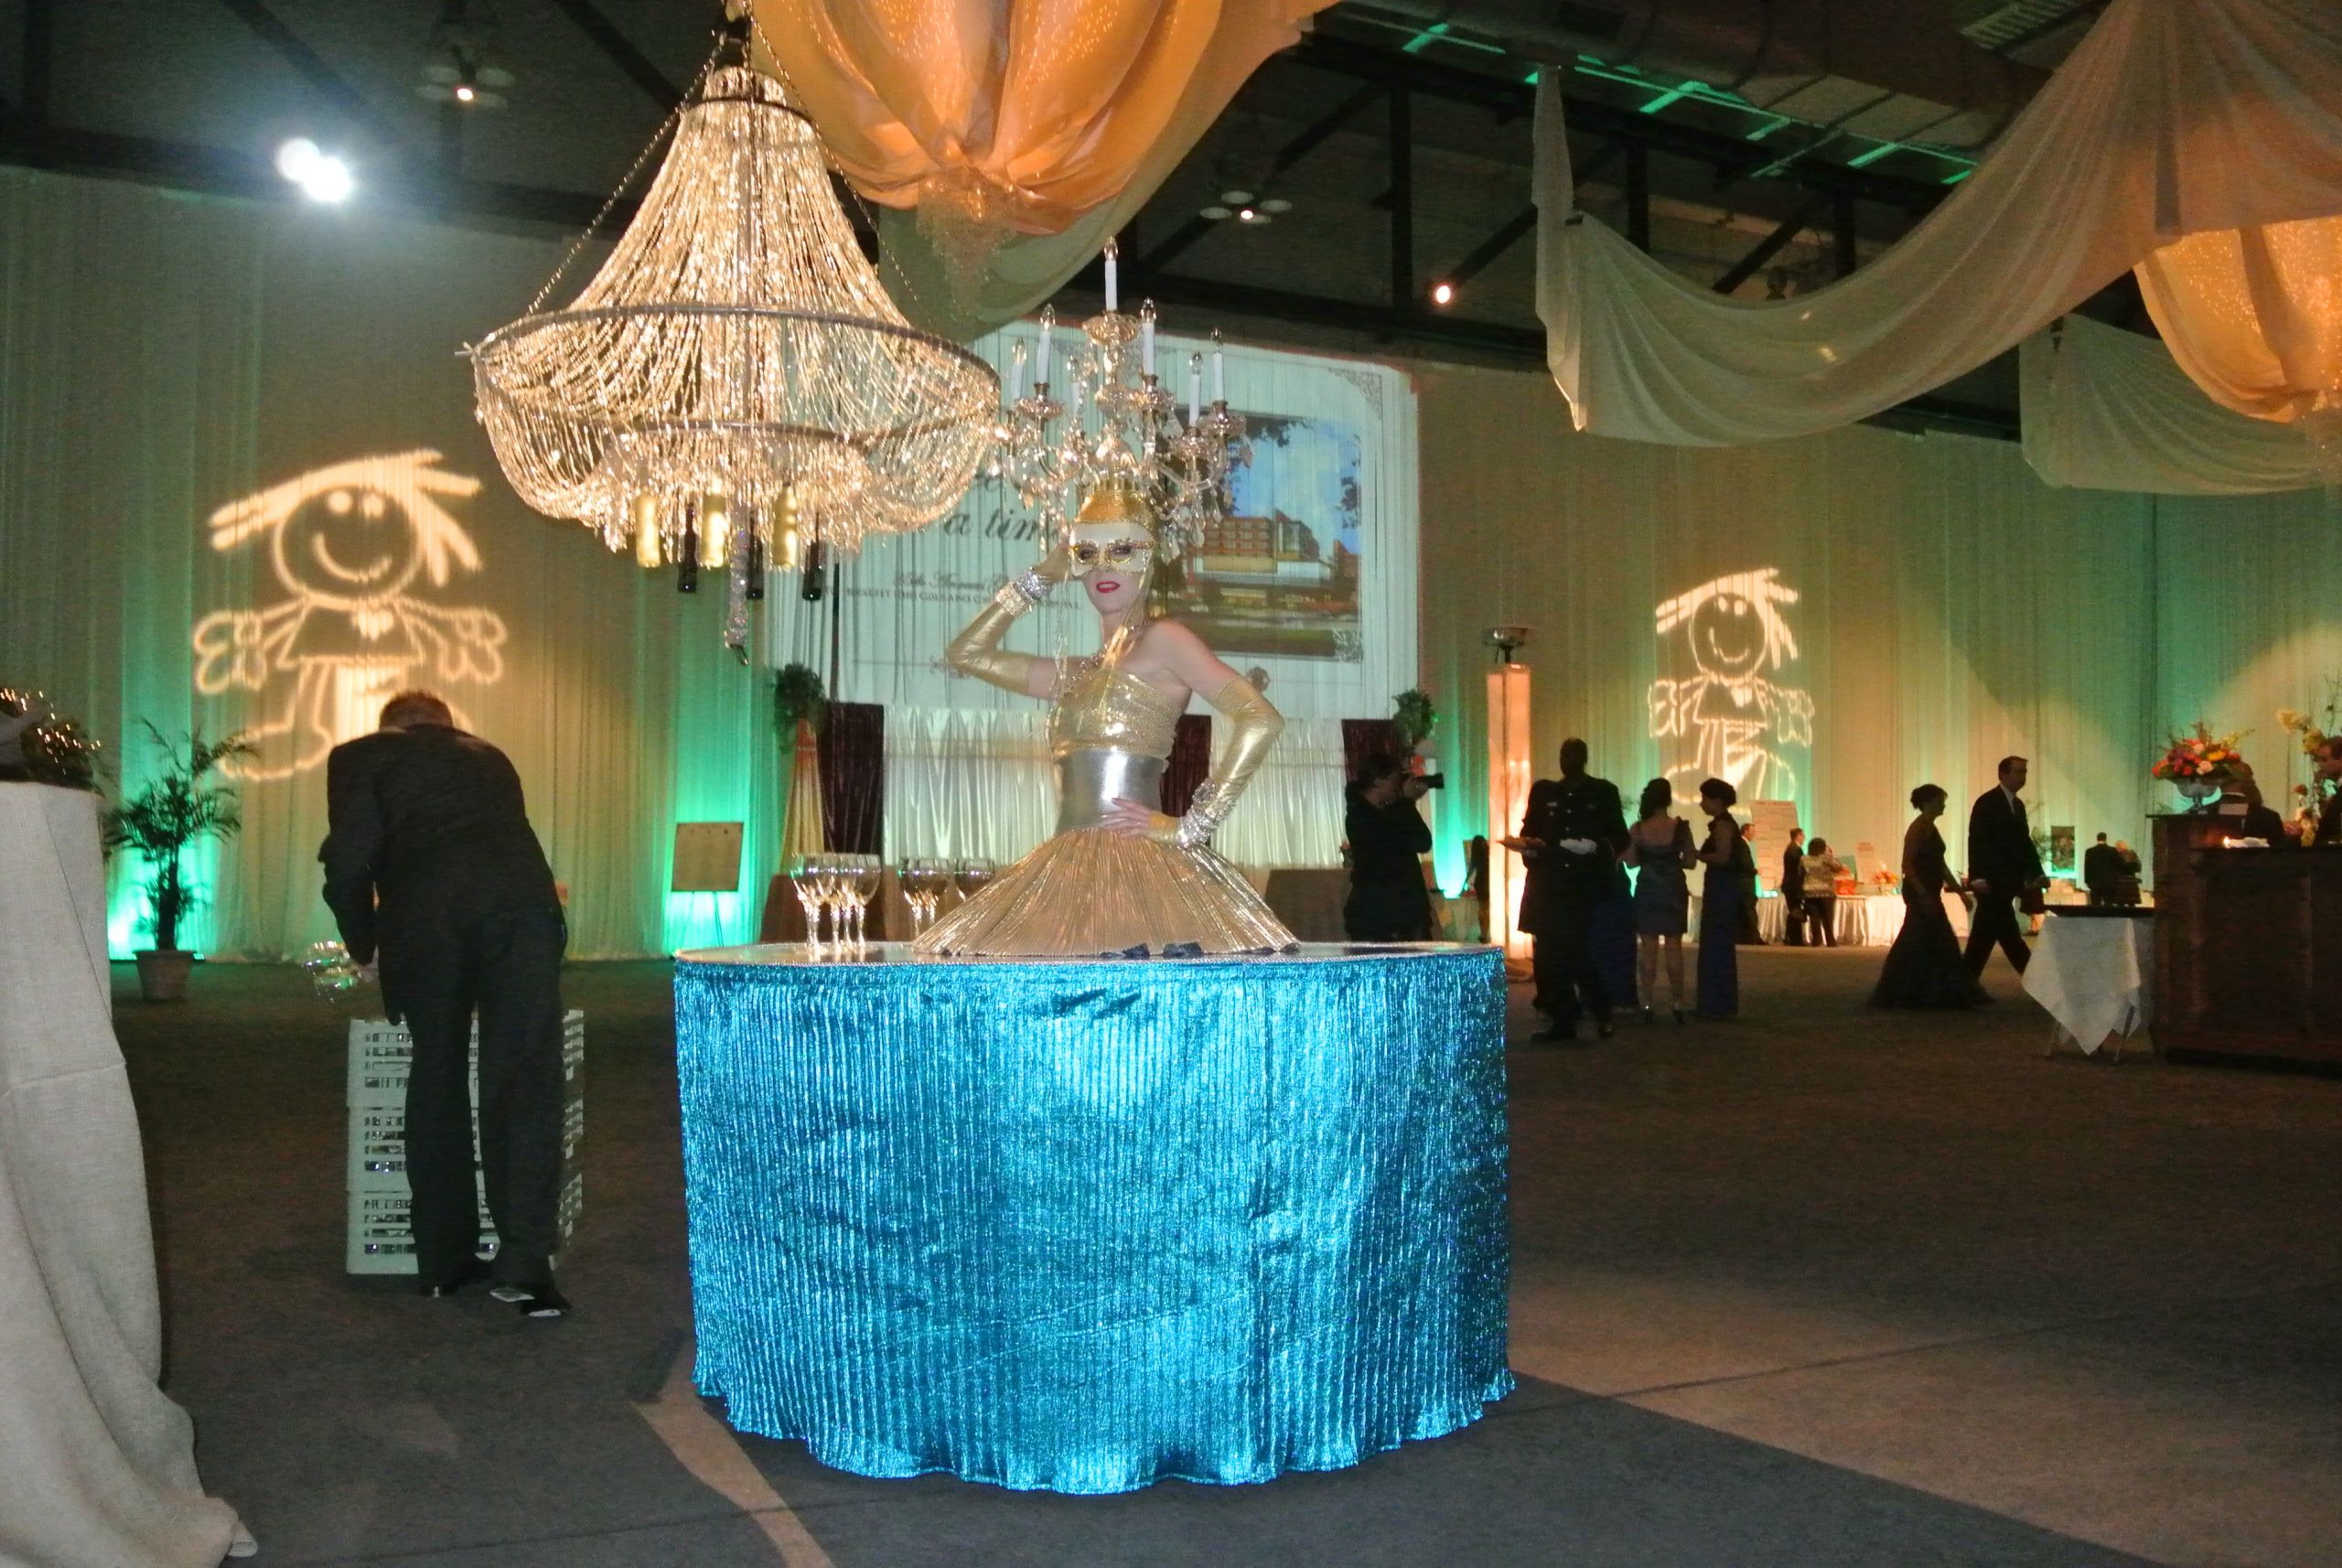 Company Holiday Party Entertainment Ideas
 Last Minute Planning Holiday Party Ideas event